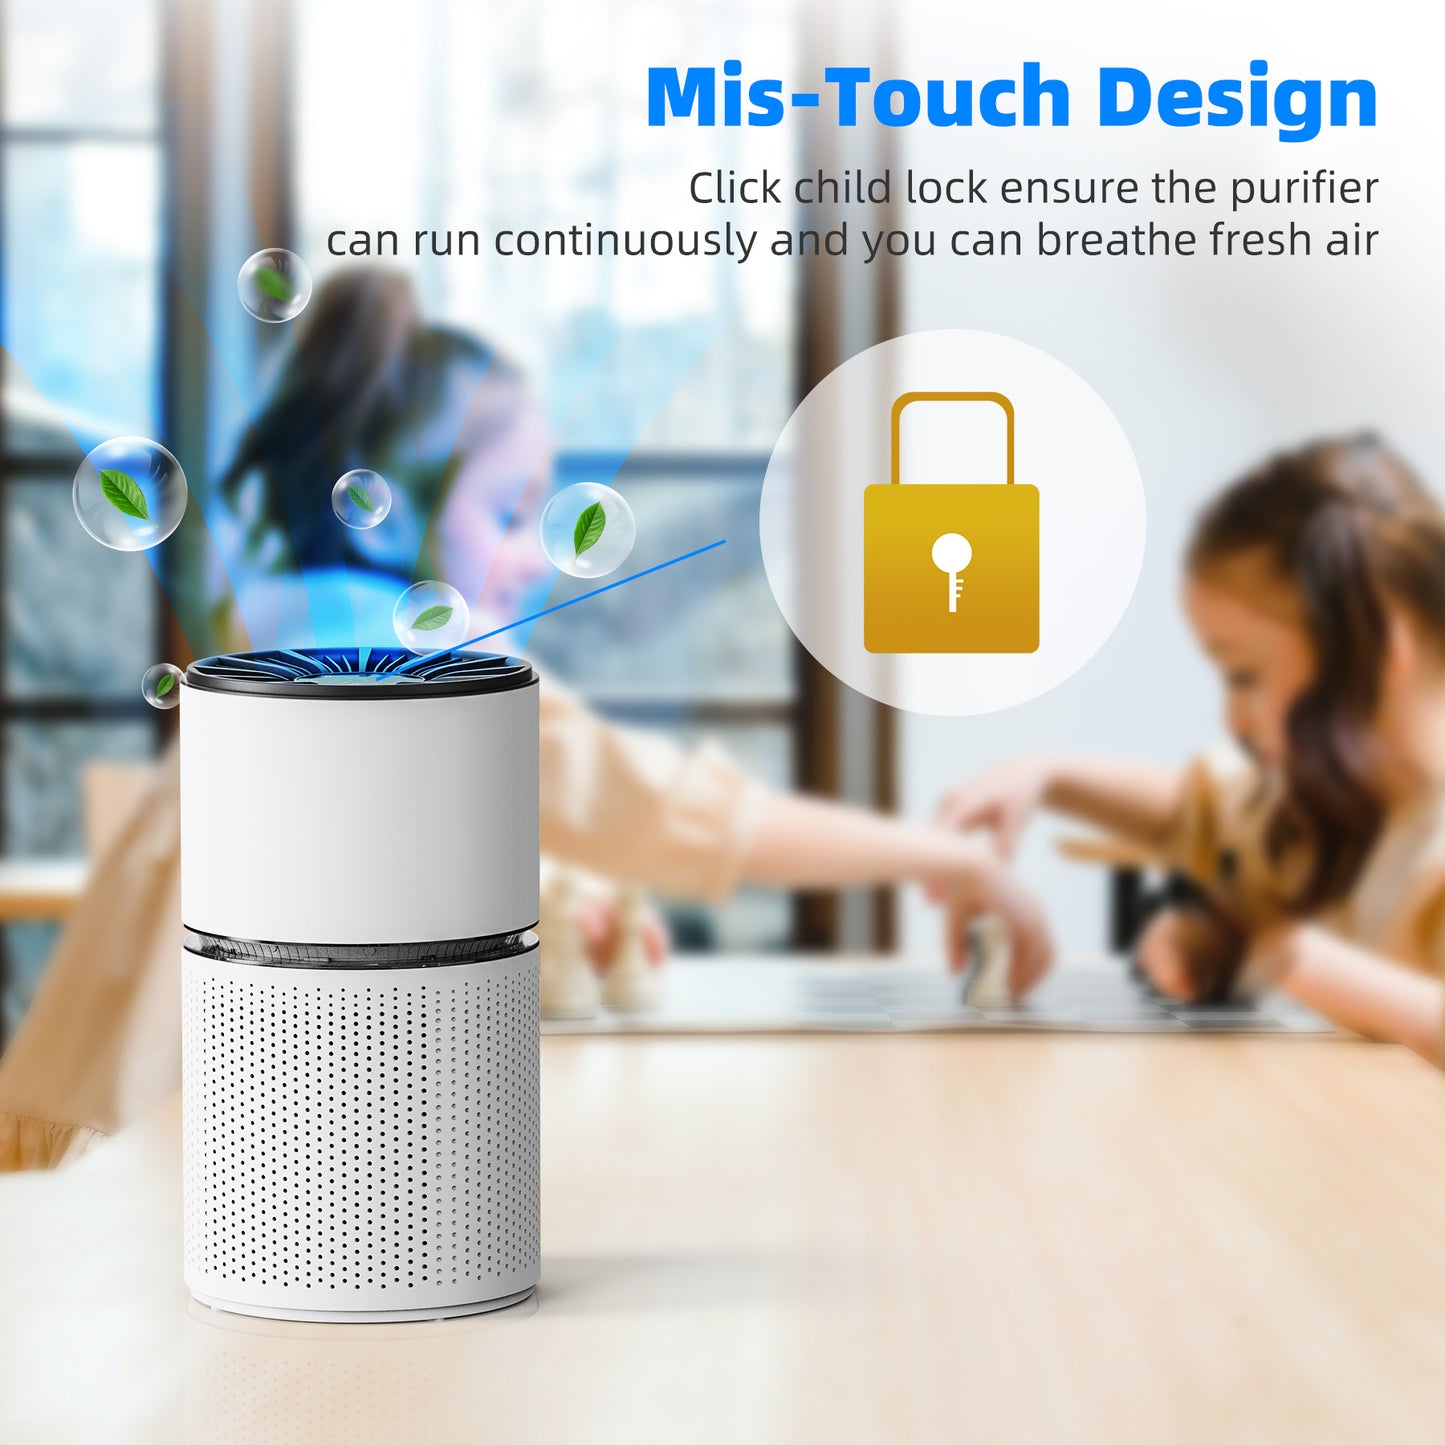 BREEZOME Air Purifiers for Home, H13 True HEPA Air Purifier Air Filter for Dust Smoke Pet Hair Odors 23db Ultra Quiet Air Cleaner for Bedroom Office Living Room Kitchen - White